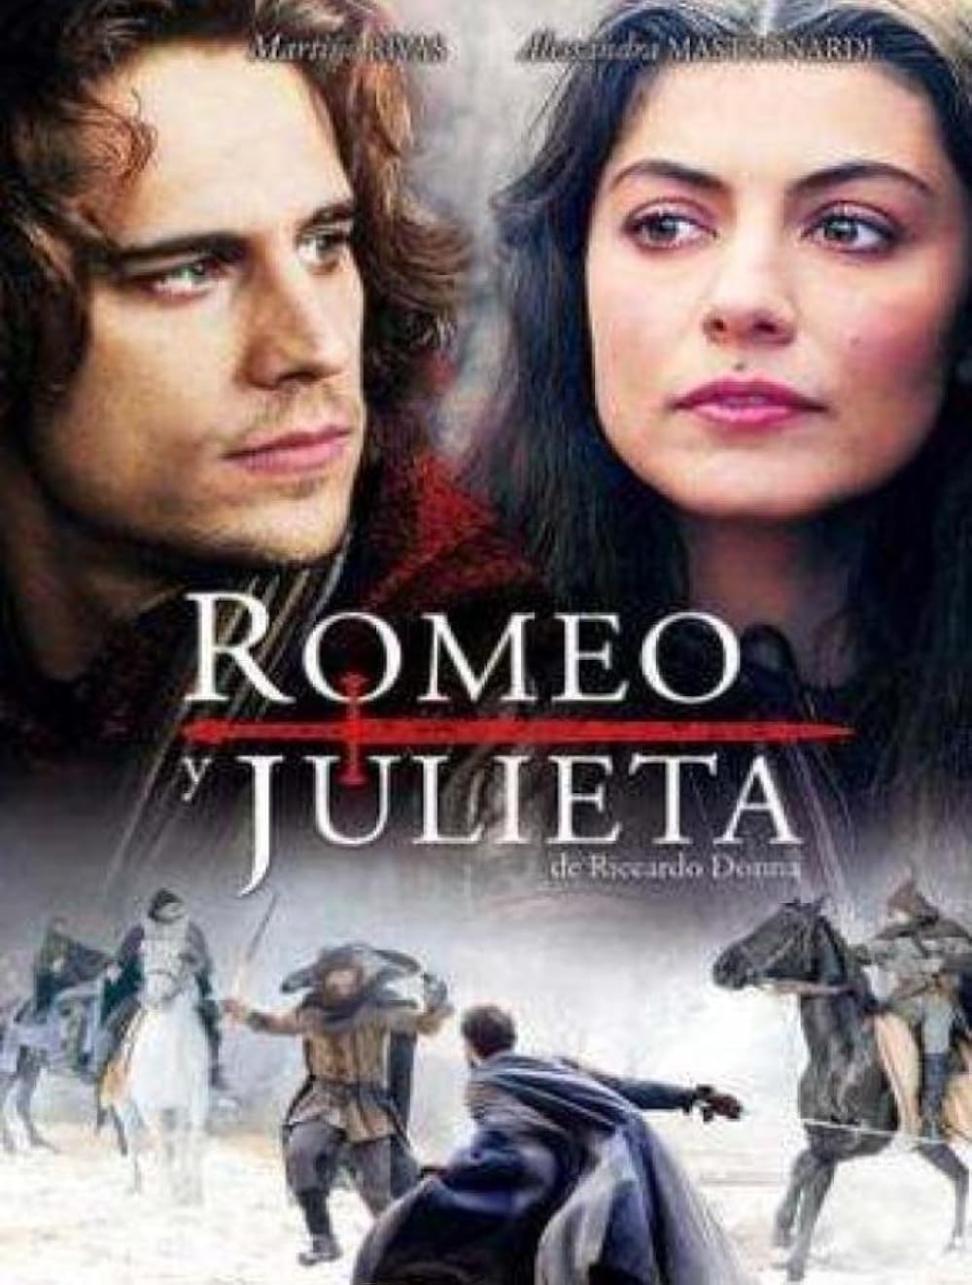 What Is The Significance Of The Setting Of Romeo And Juliet?